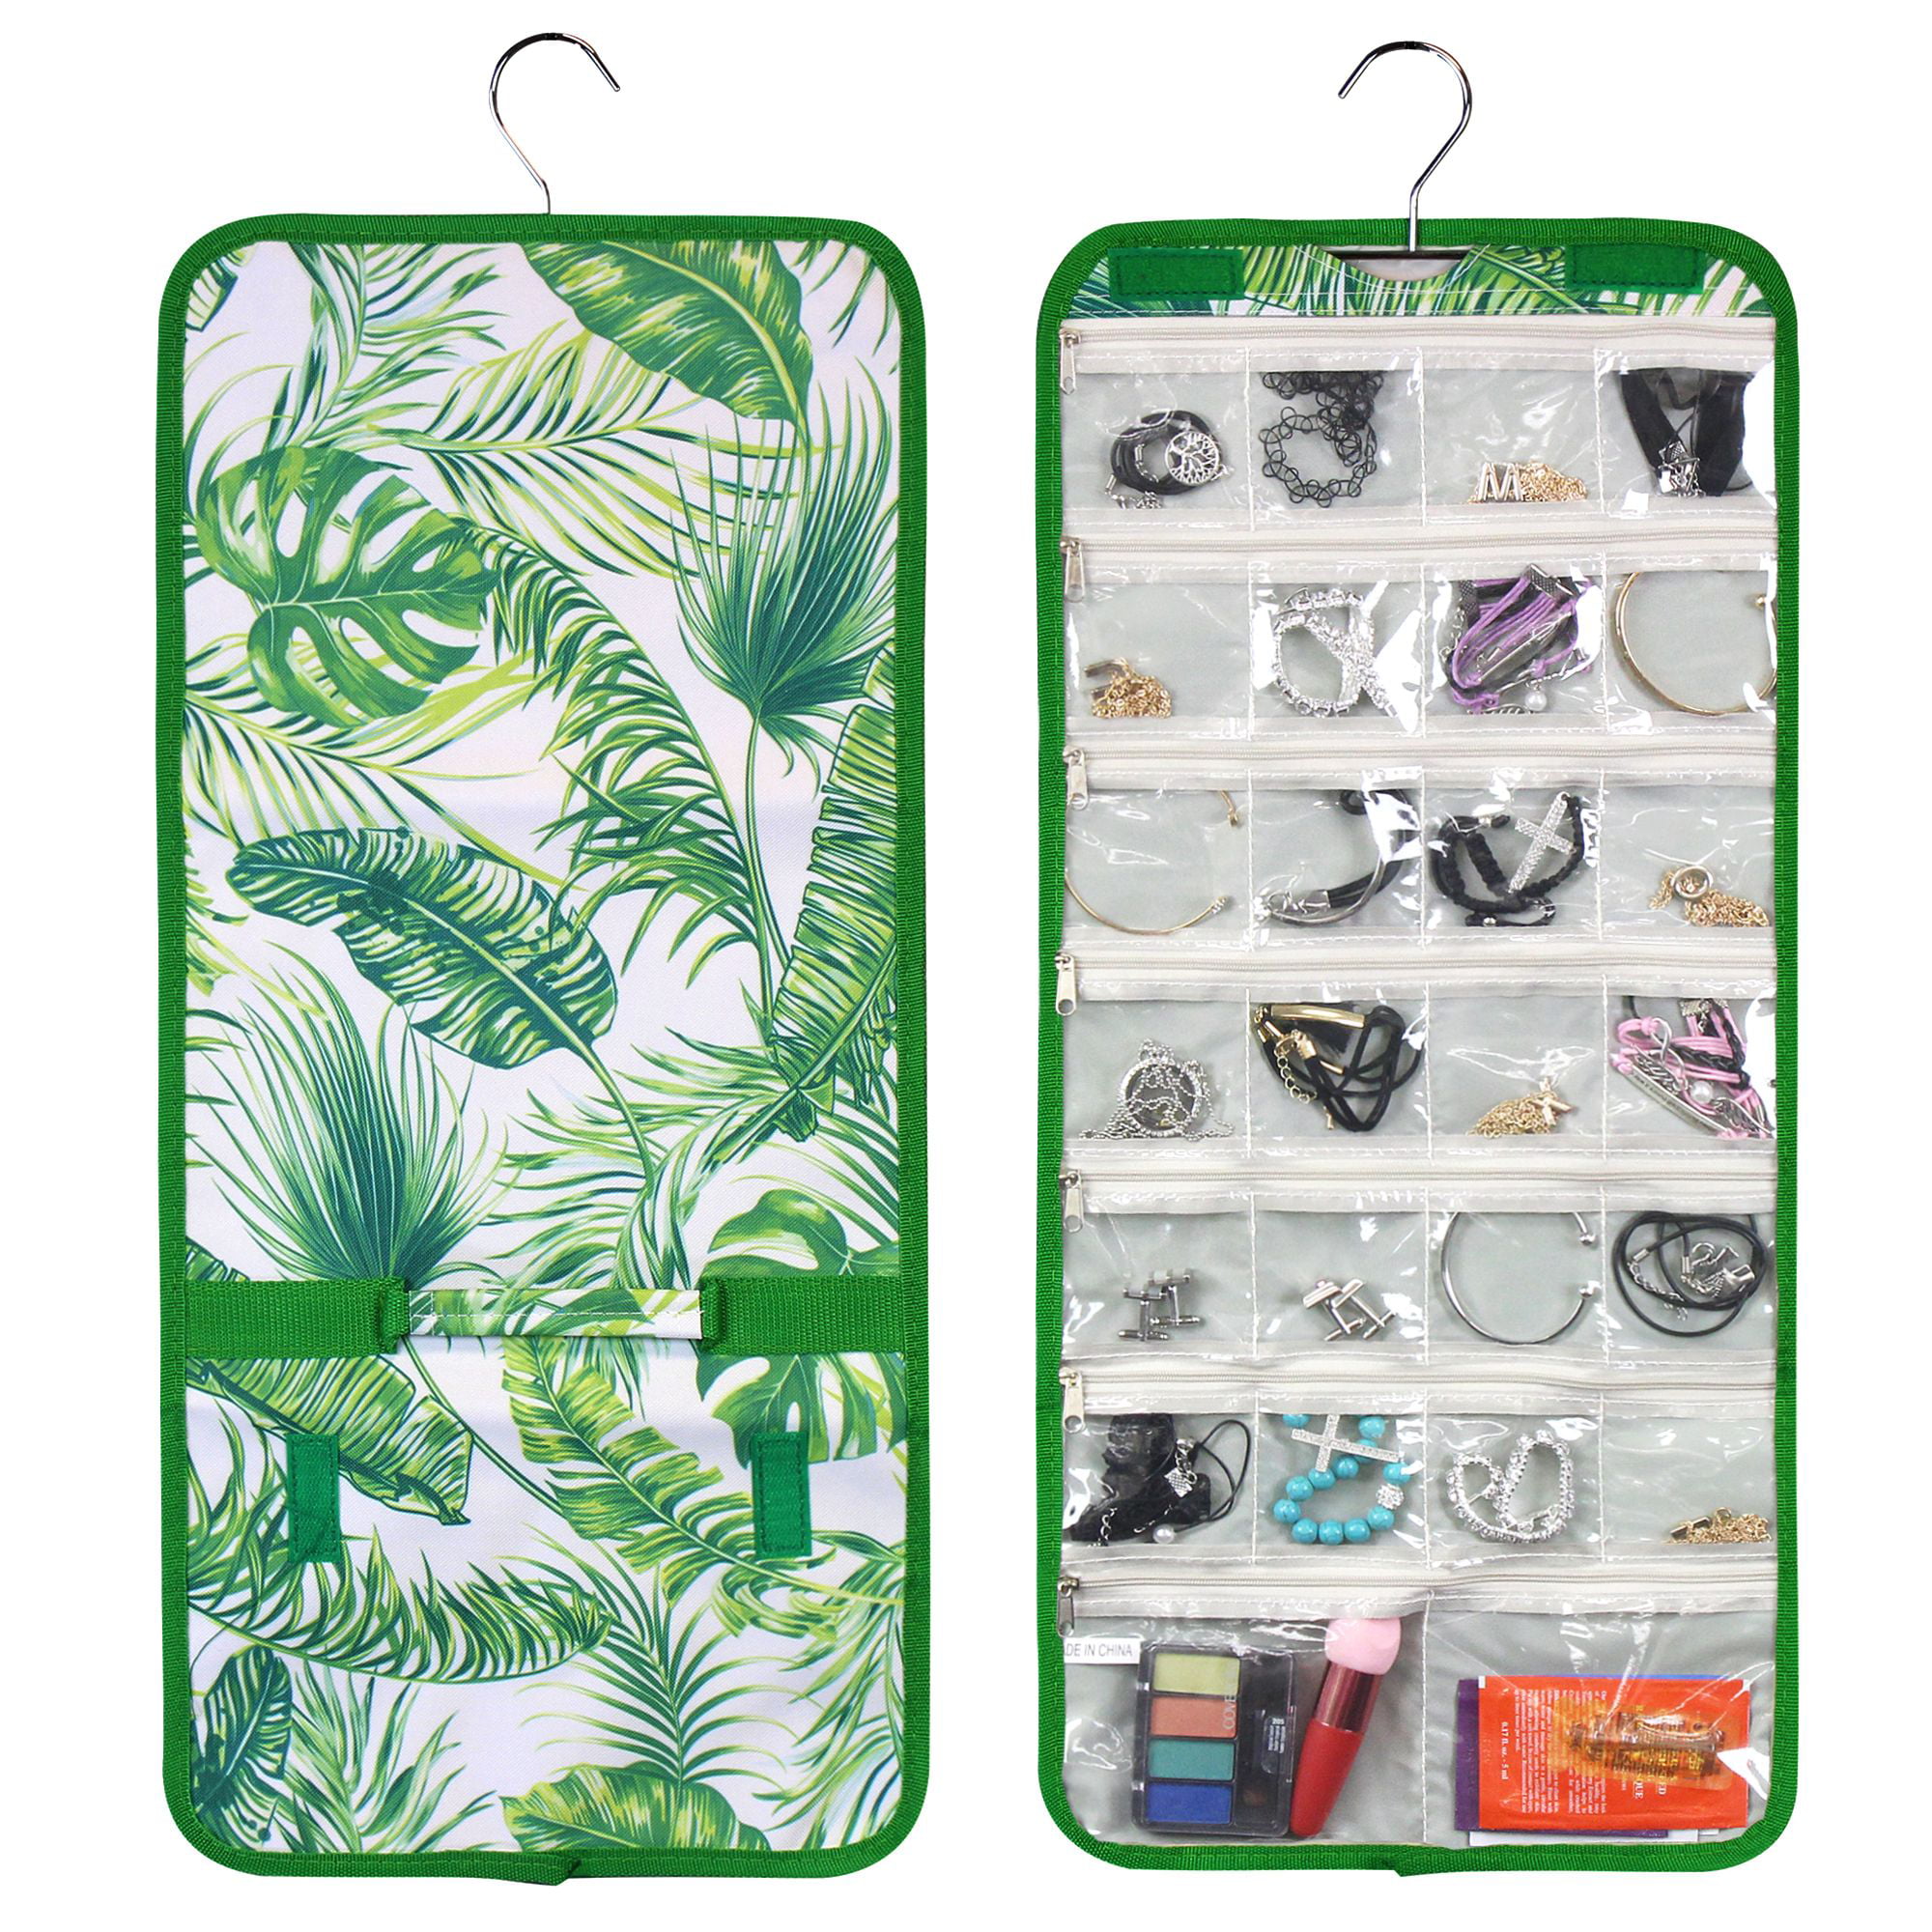 Baggage Covers Retro Birds Tropical Palm Leaves Washable Protective Case 